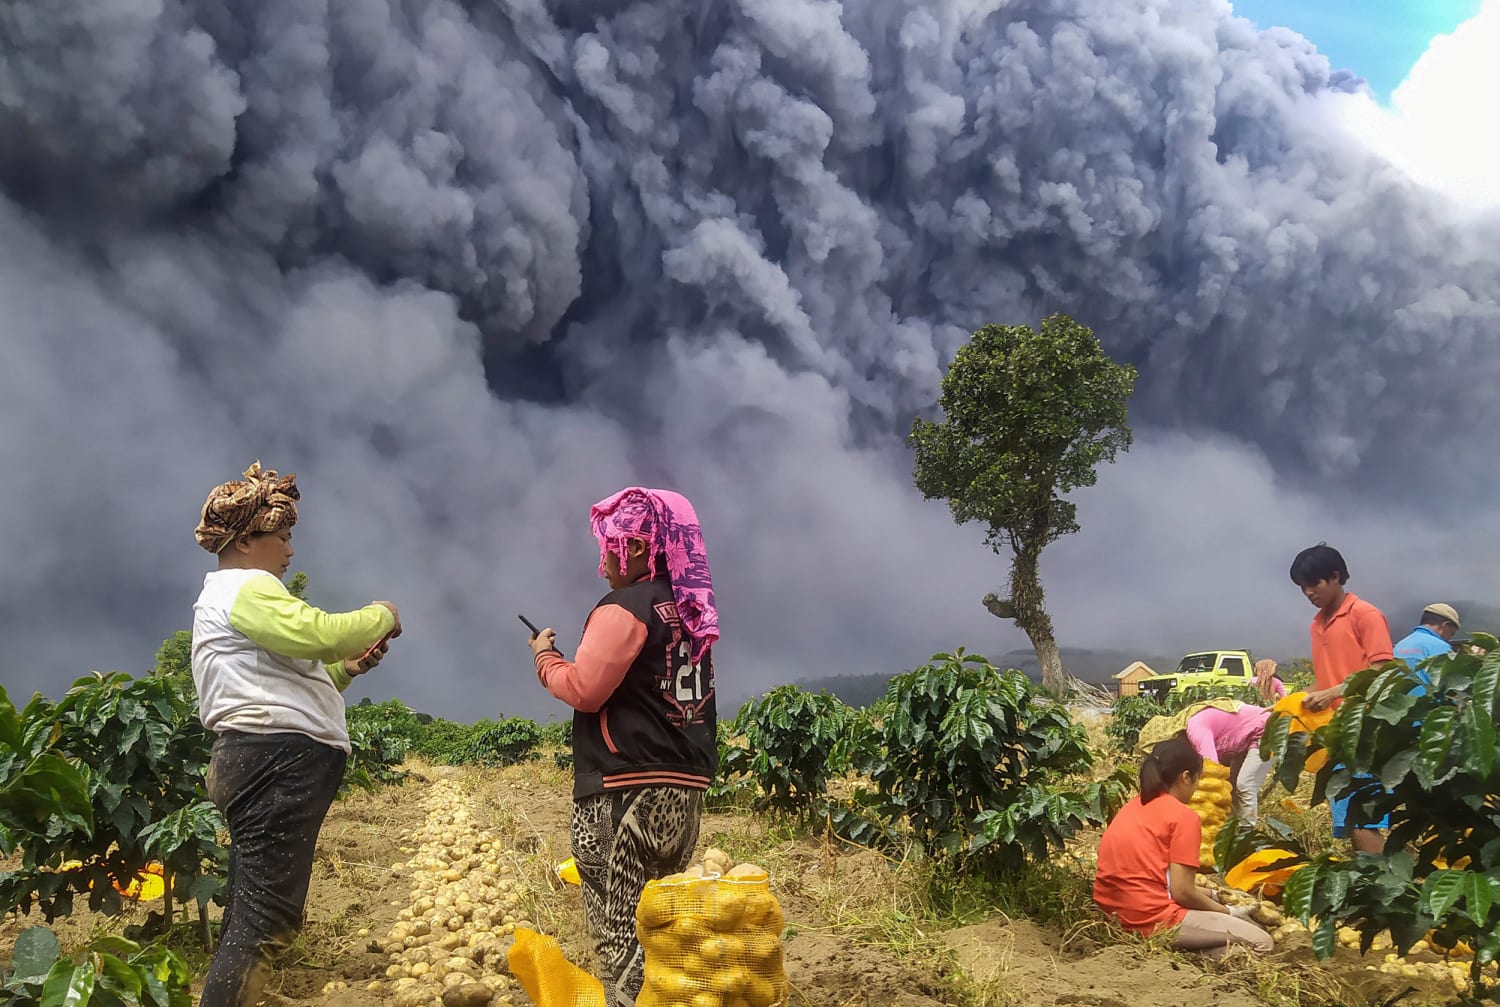 Indonesia's Mount Sinabung volcano erupts twice in three days